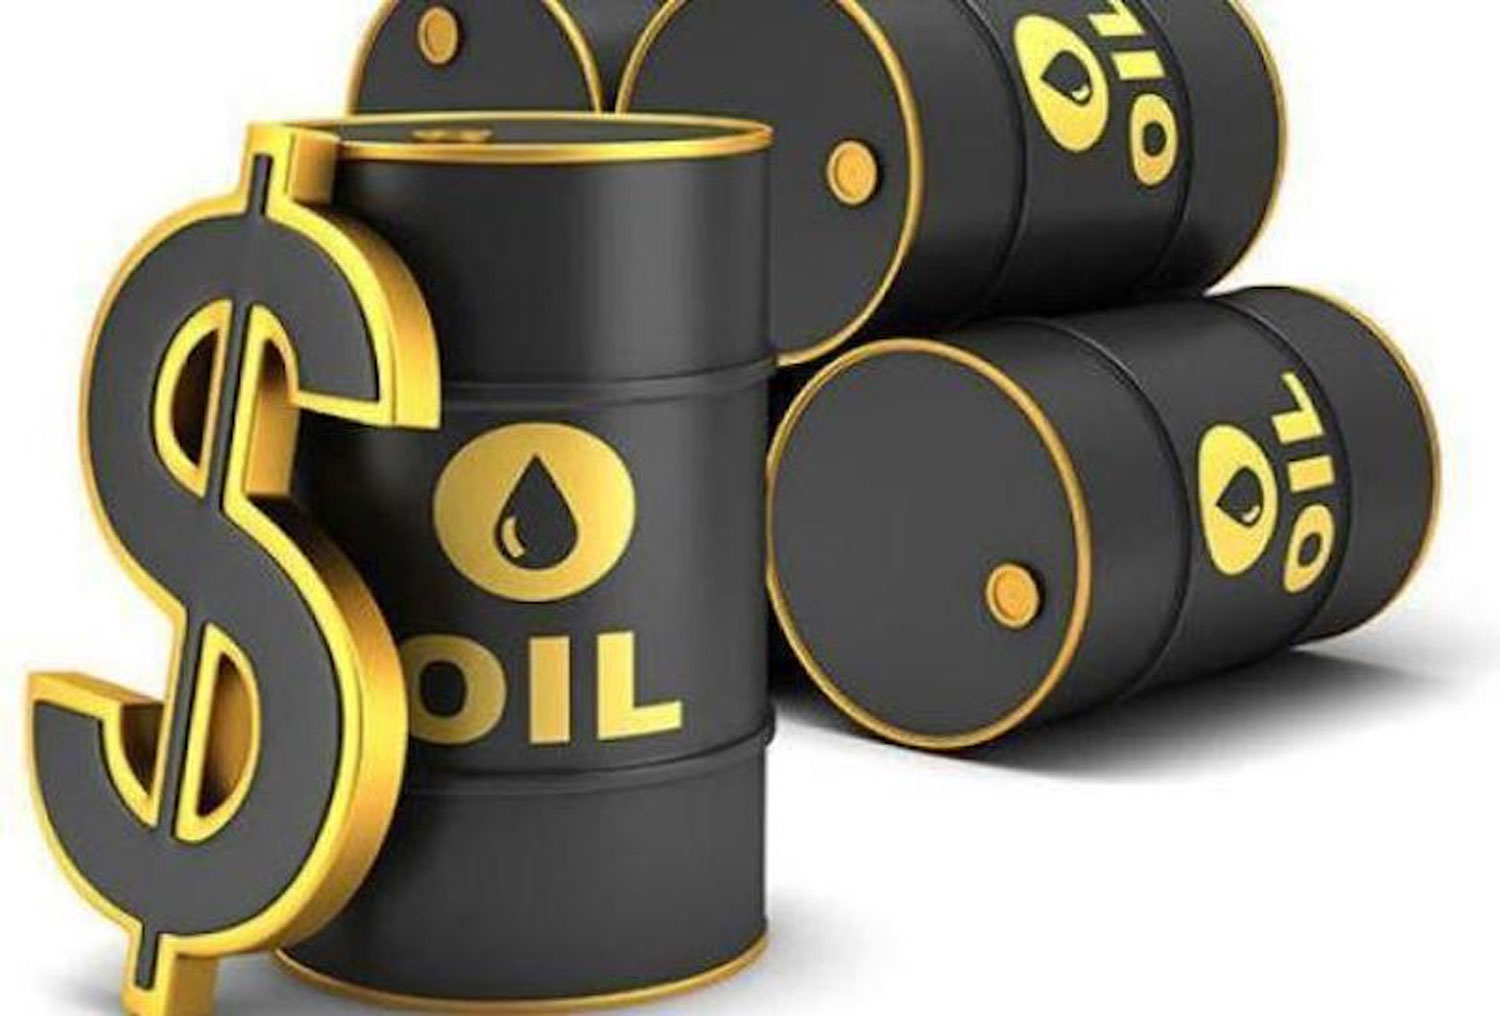 Days of crude oil are numbered ― FG